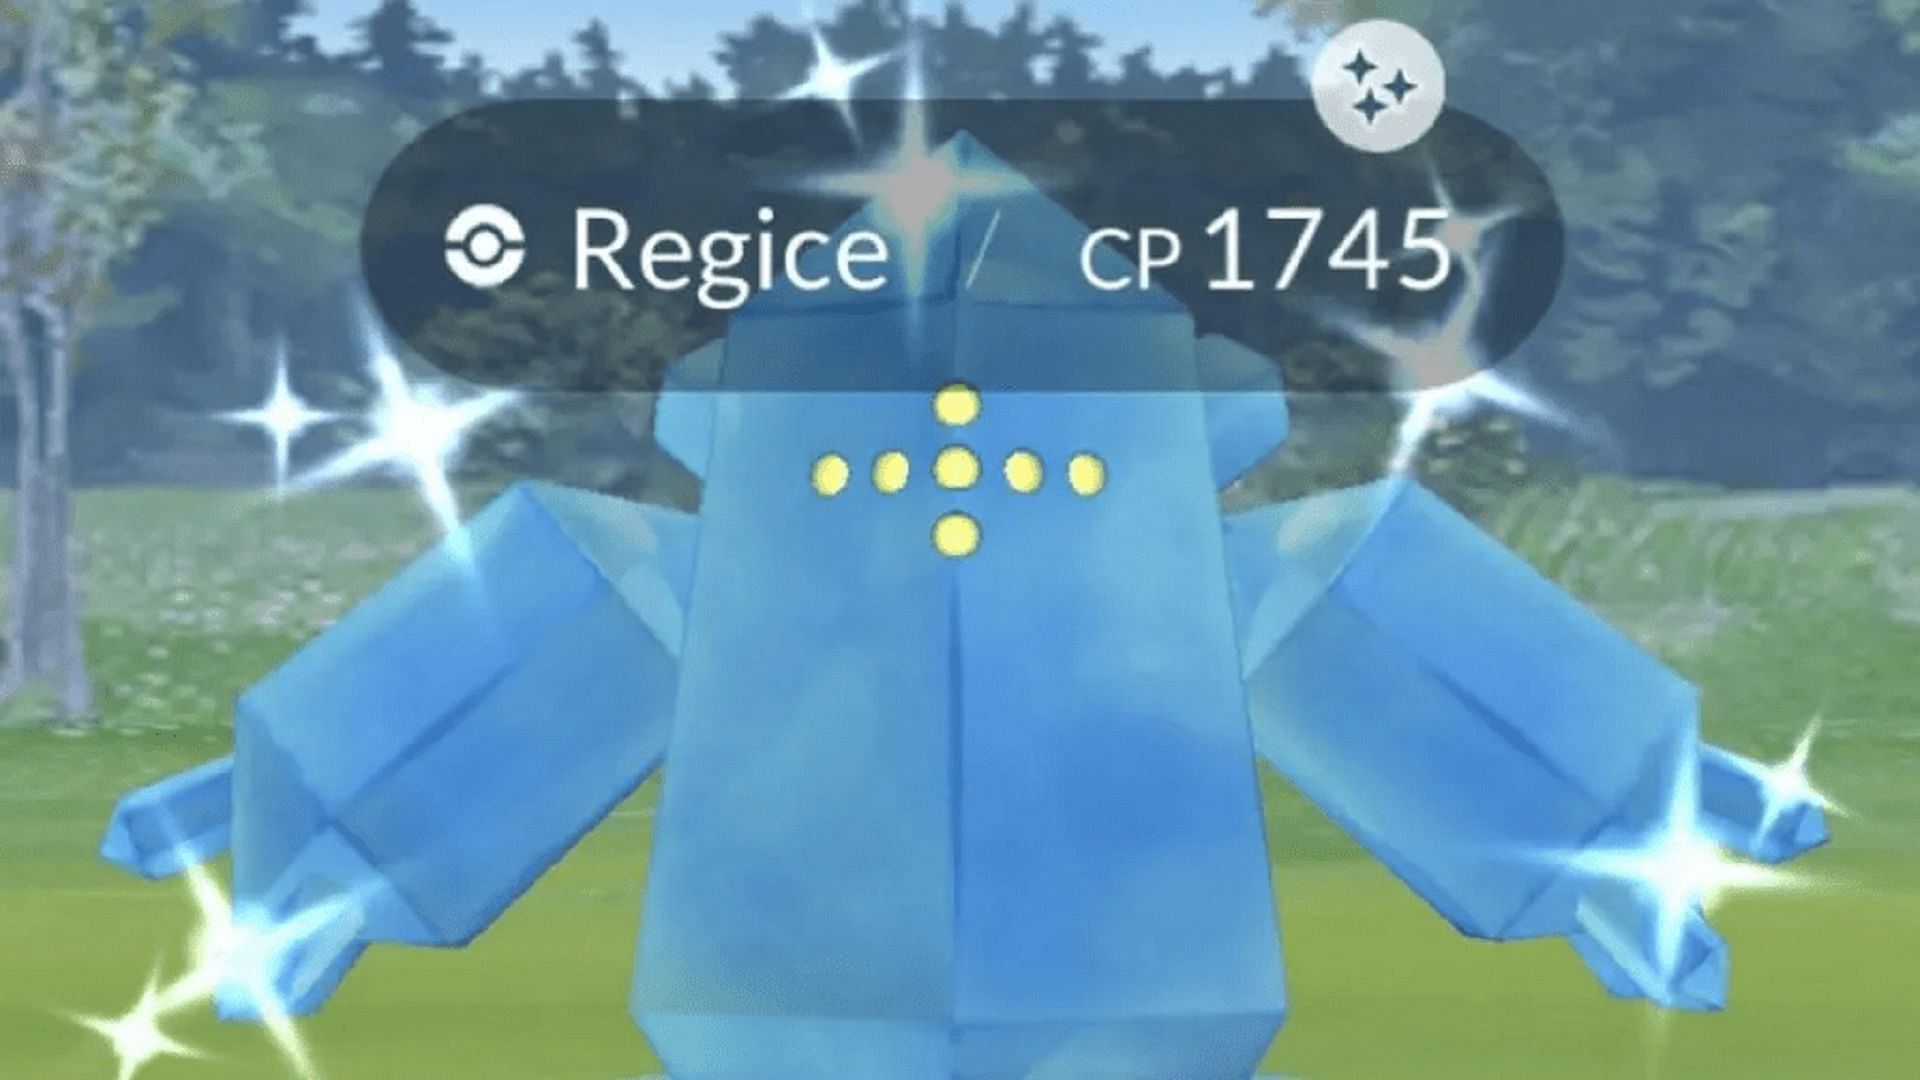 Shiny Regice possesses a deeper blue coloration compared to its standard counterpart (Image via Niantic)